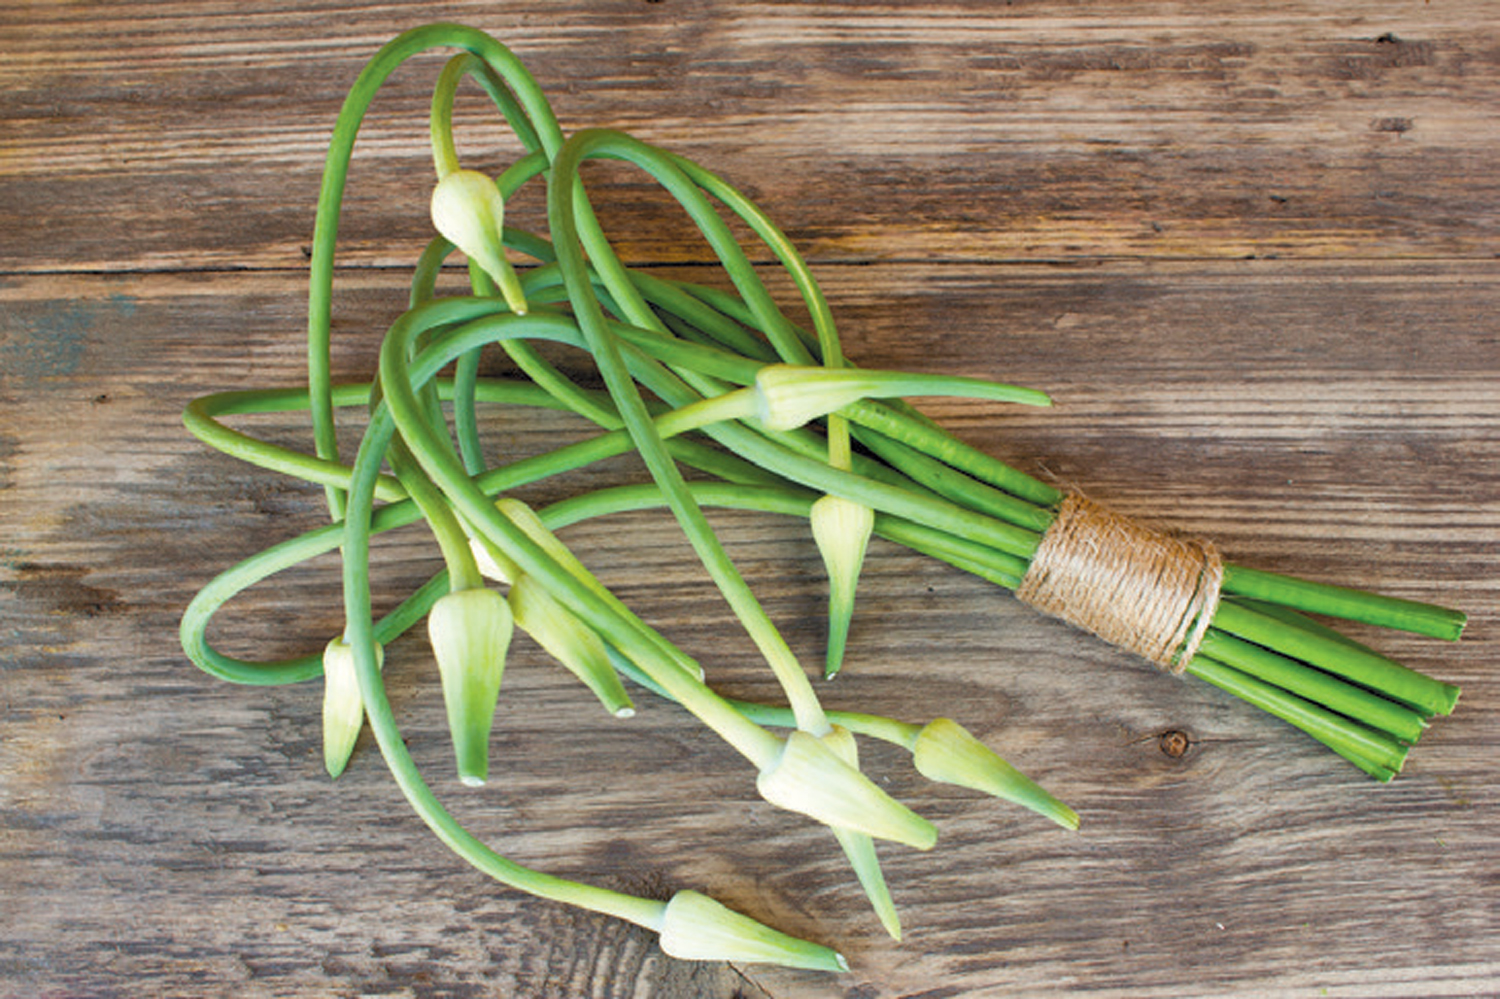 What Do You Do With Garlic Scapes Food And Drink